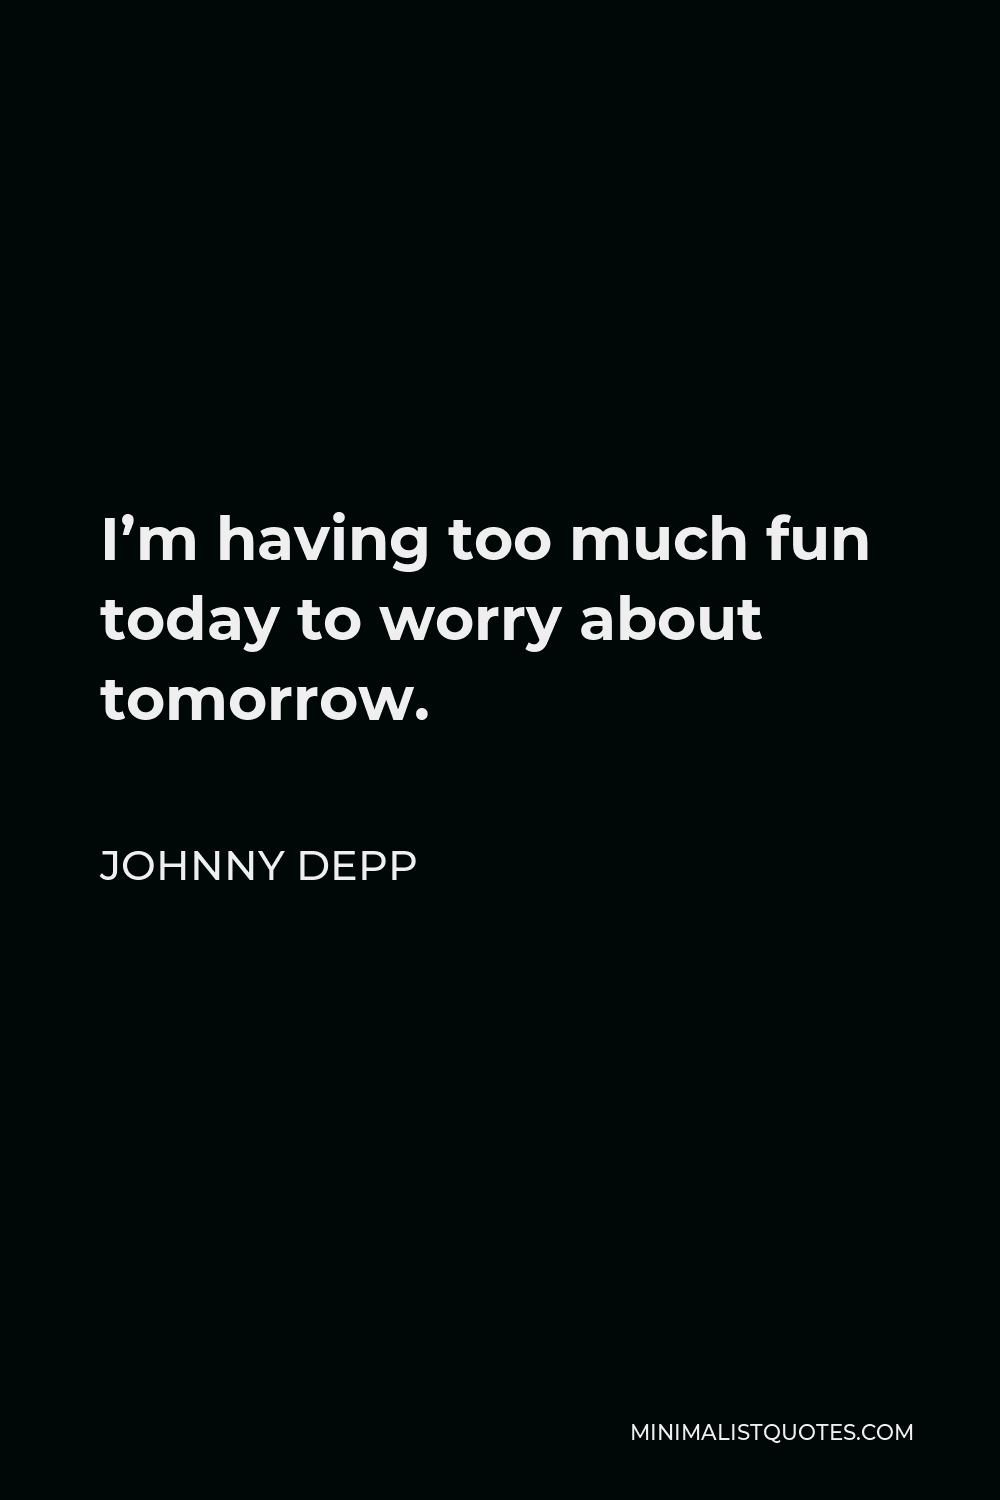 Johnny Depp Quote - I’m having too much fun today to worry about tomorrow.